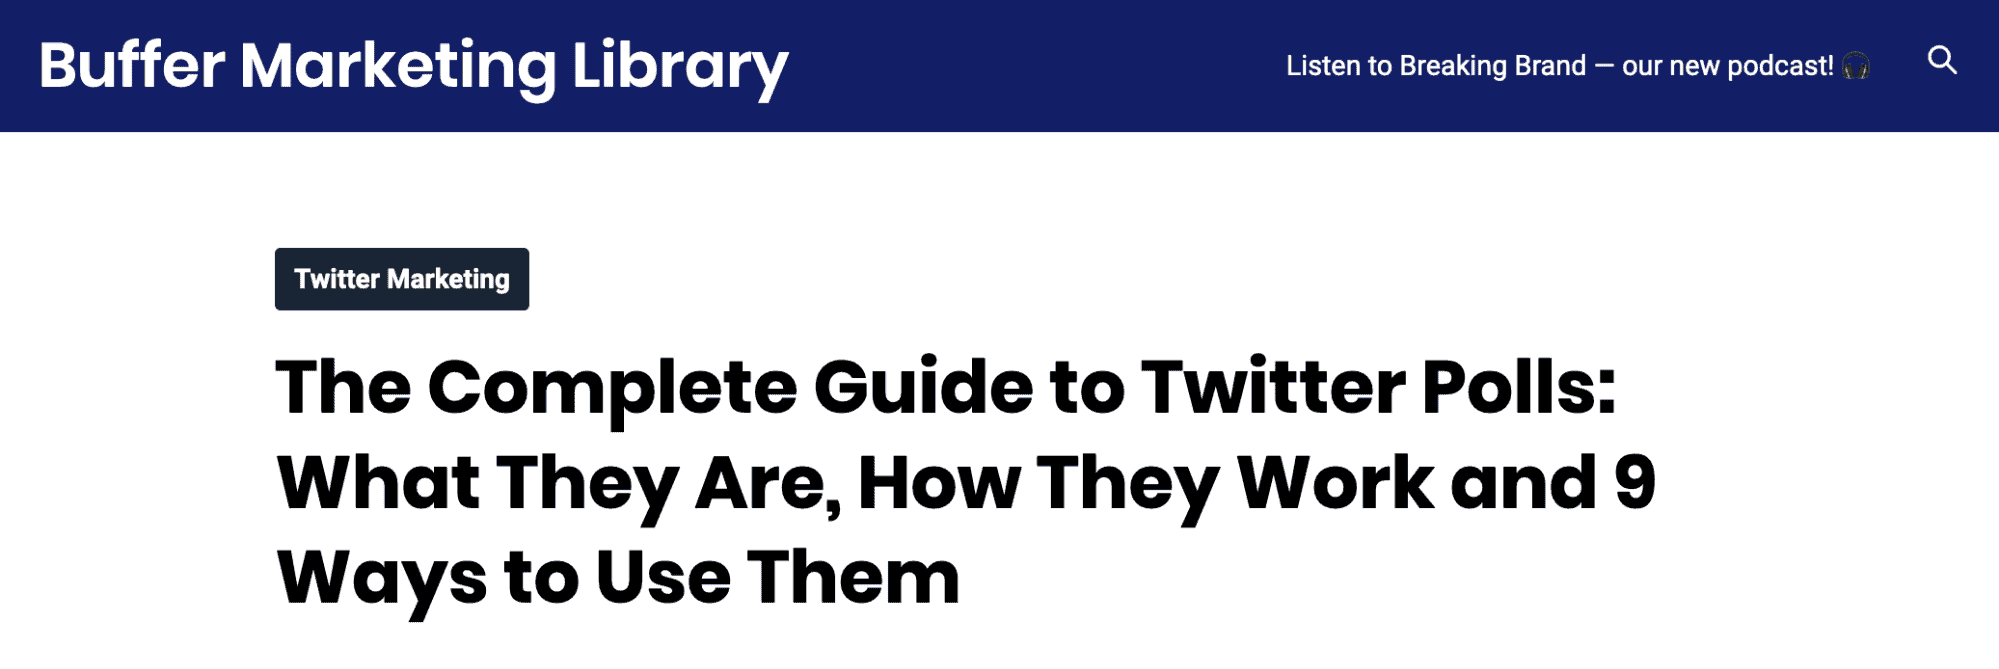 Things to write about- Buffer Marketing Library (Twitter Marketing)